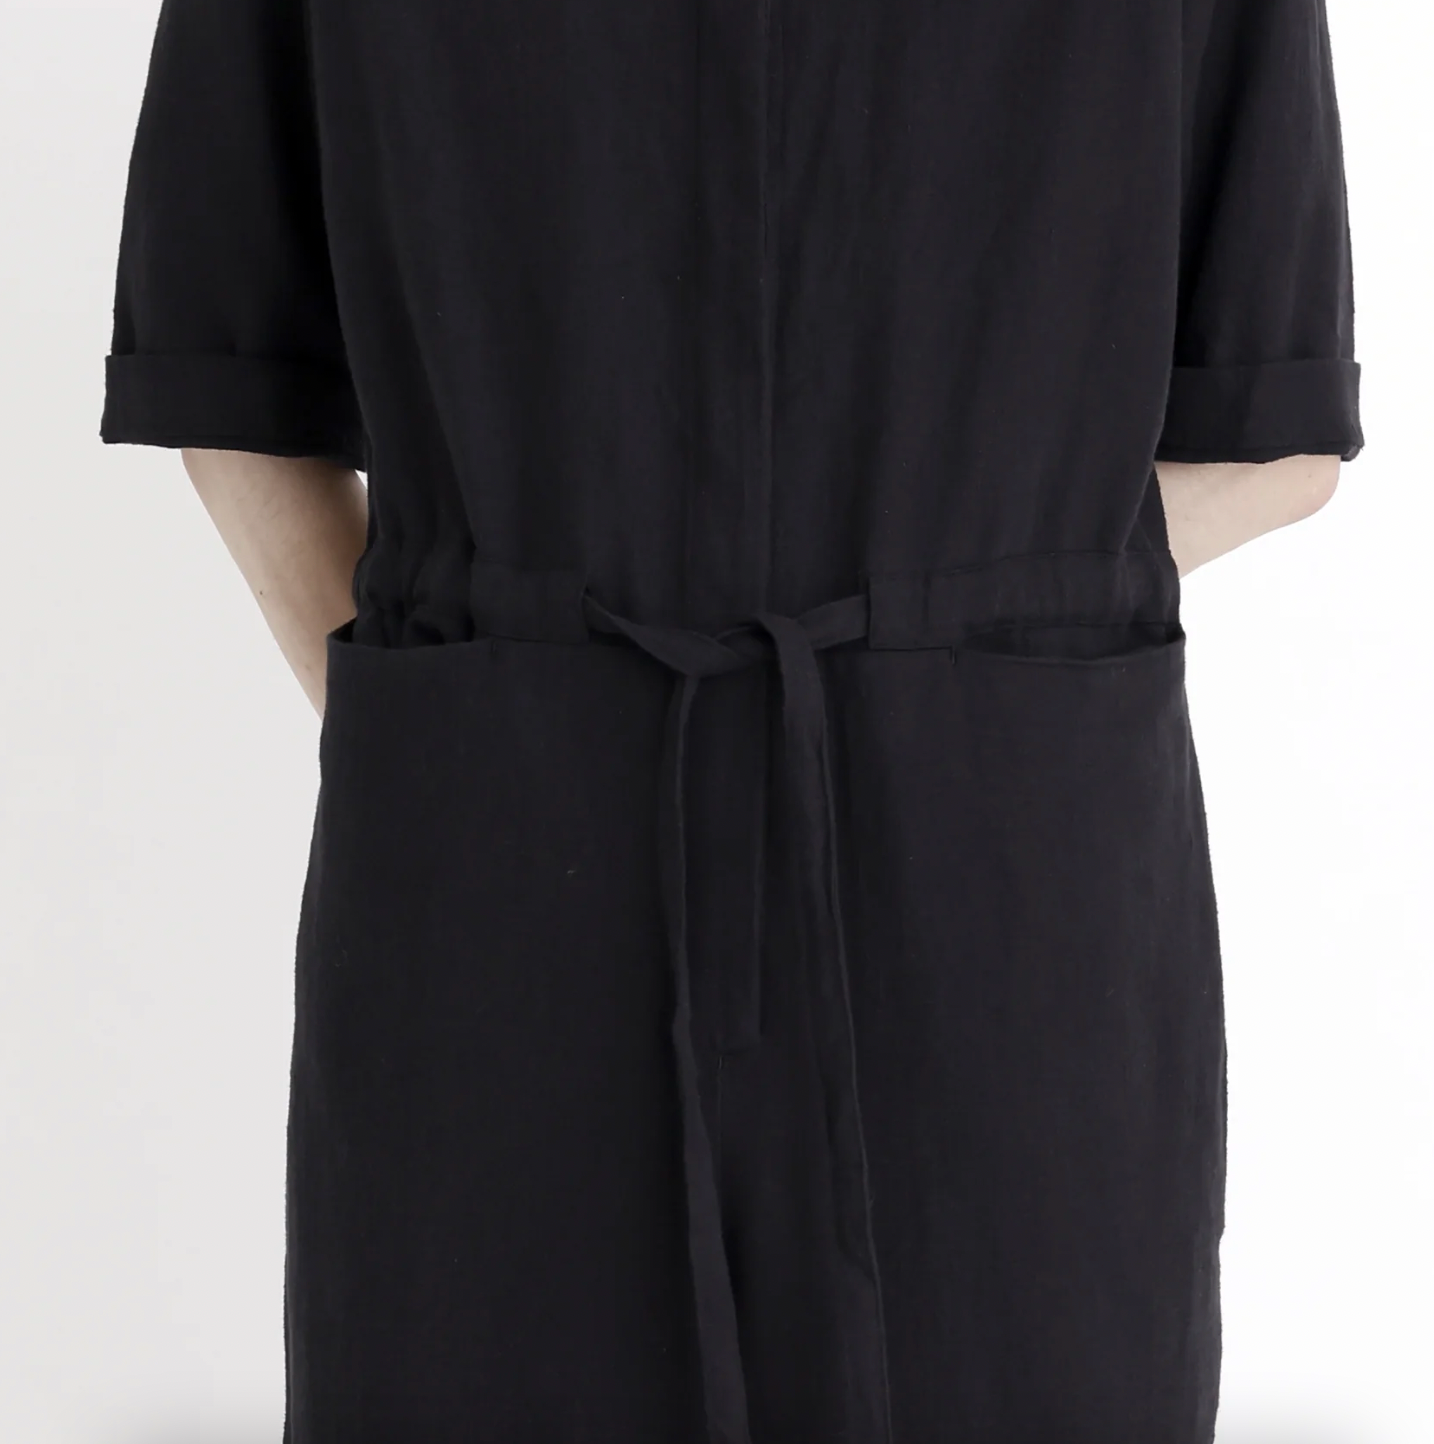 Product Image for Everyday Jumpsuit, Black